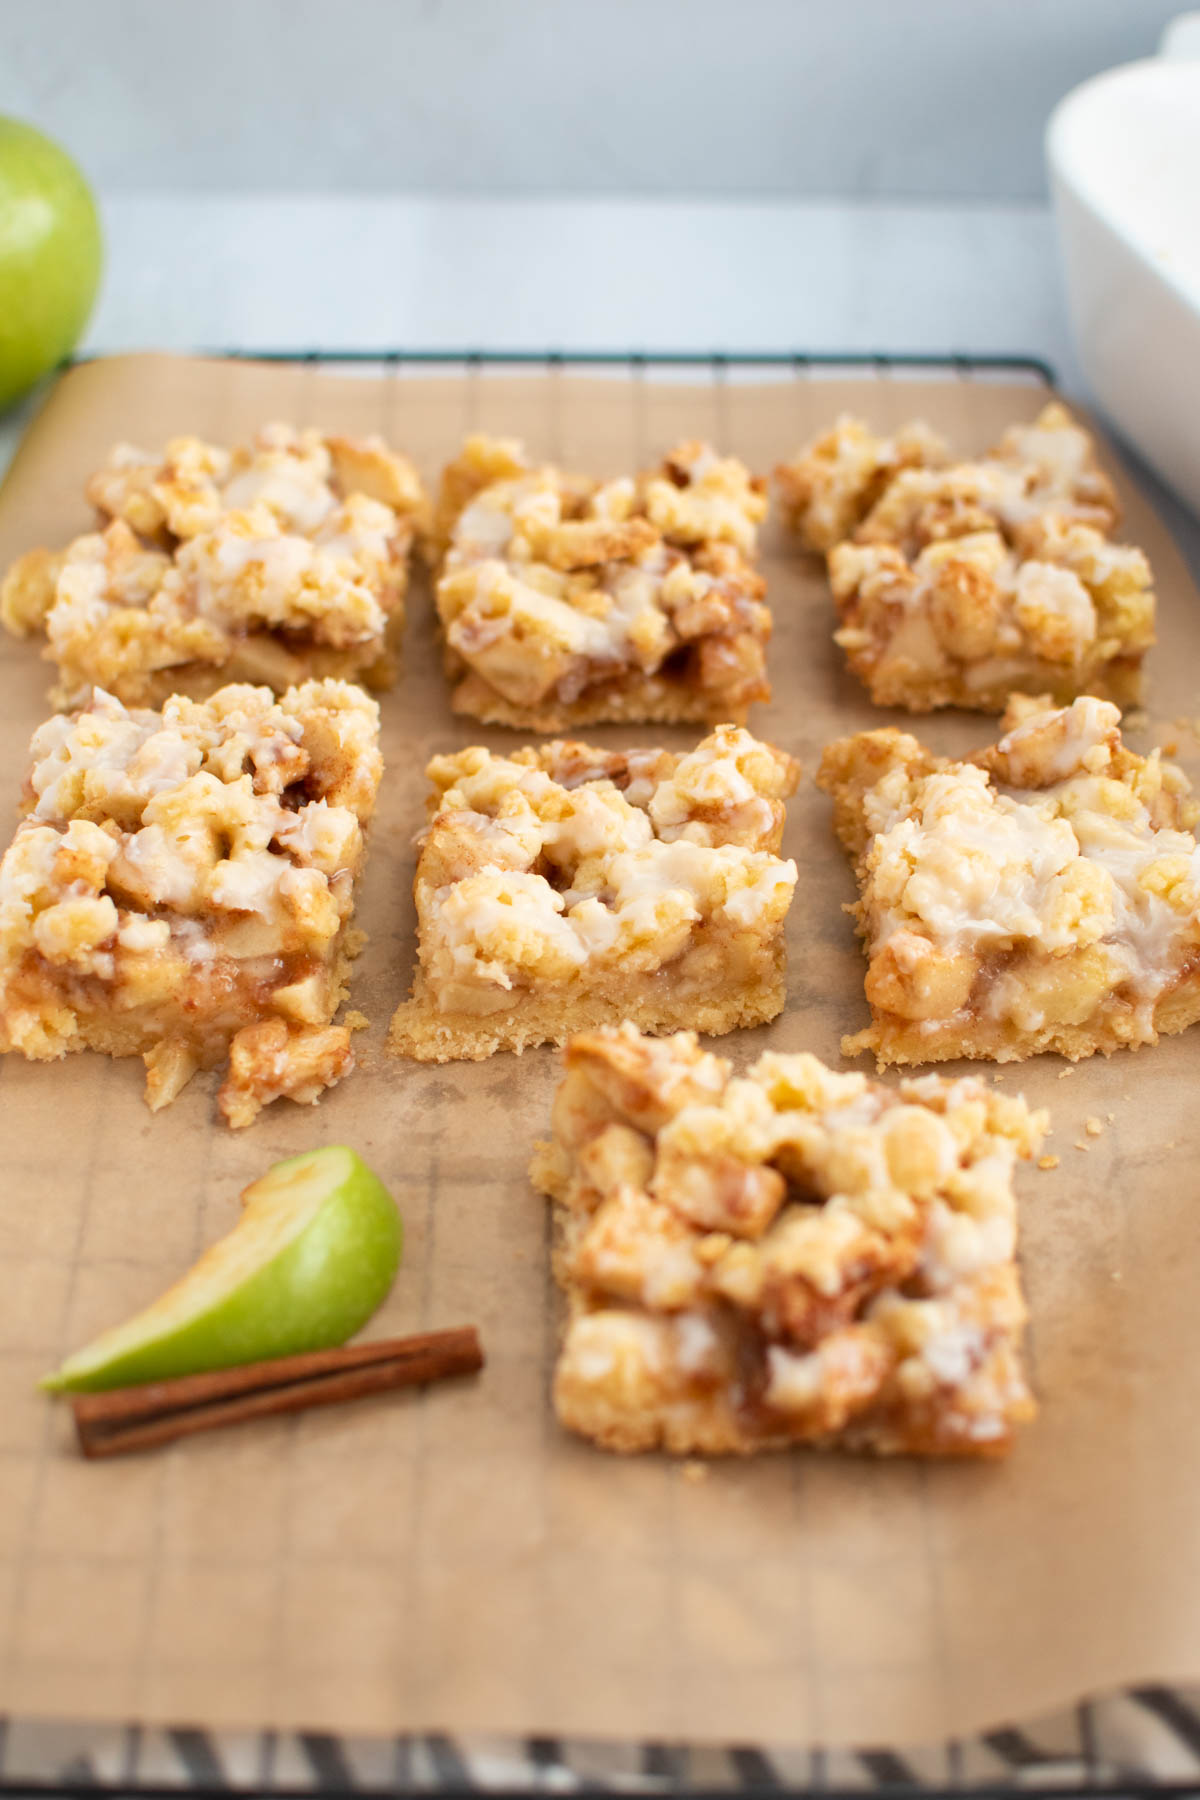 Several apple streusel bars on parchment lined baking sheet.